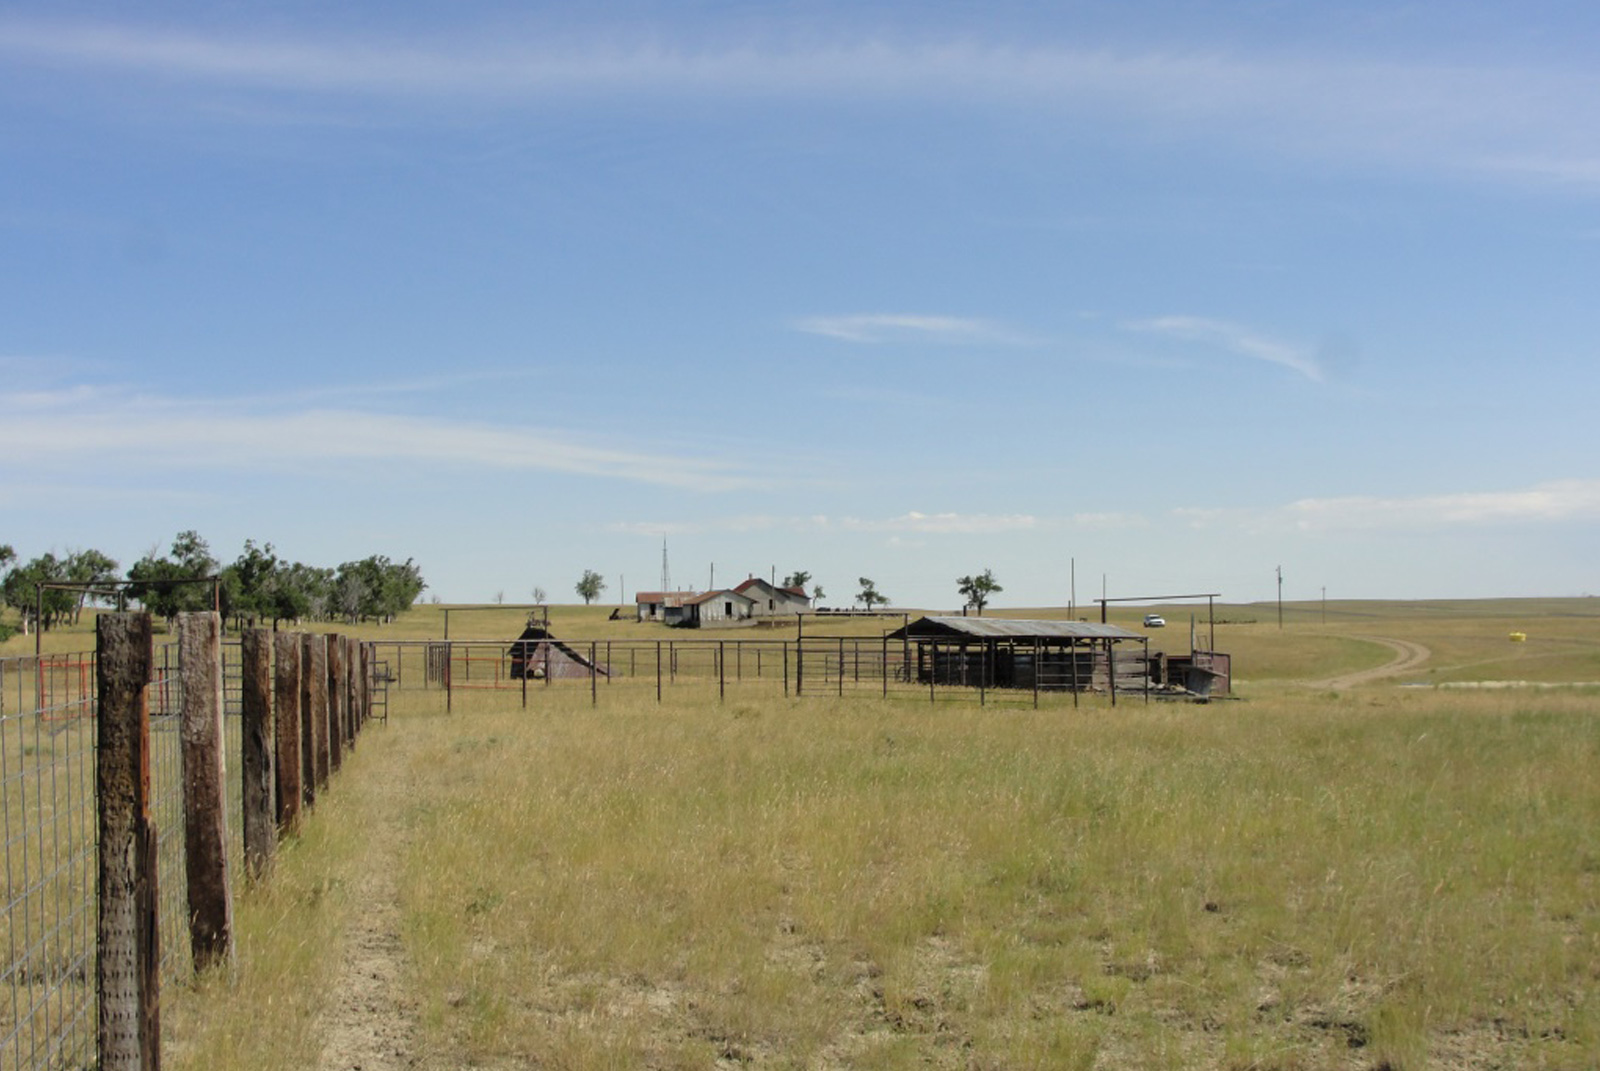 Overview of open land featuring post-and-wire fencing, outbuildings, and residence in distance.